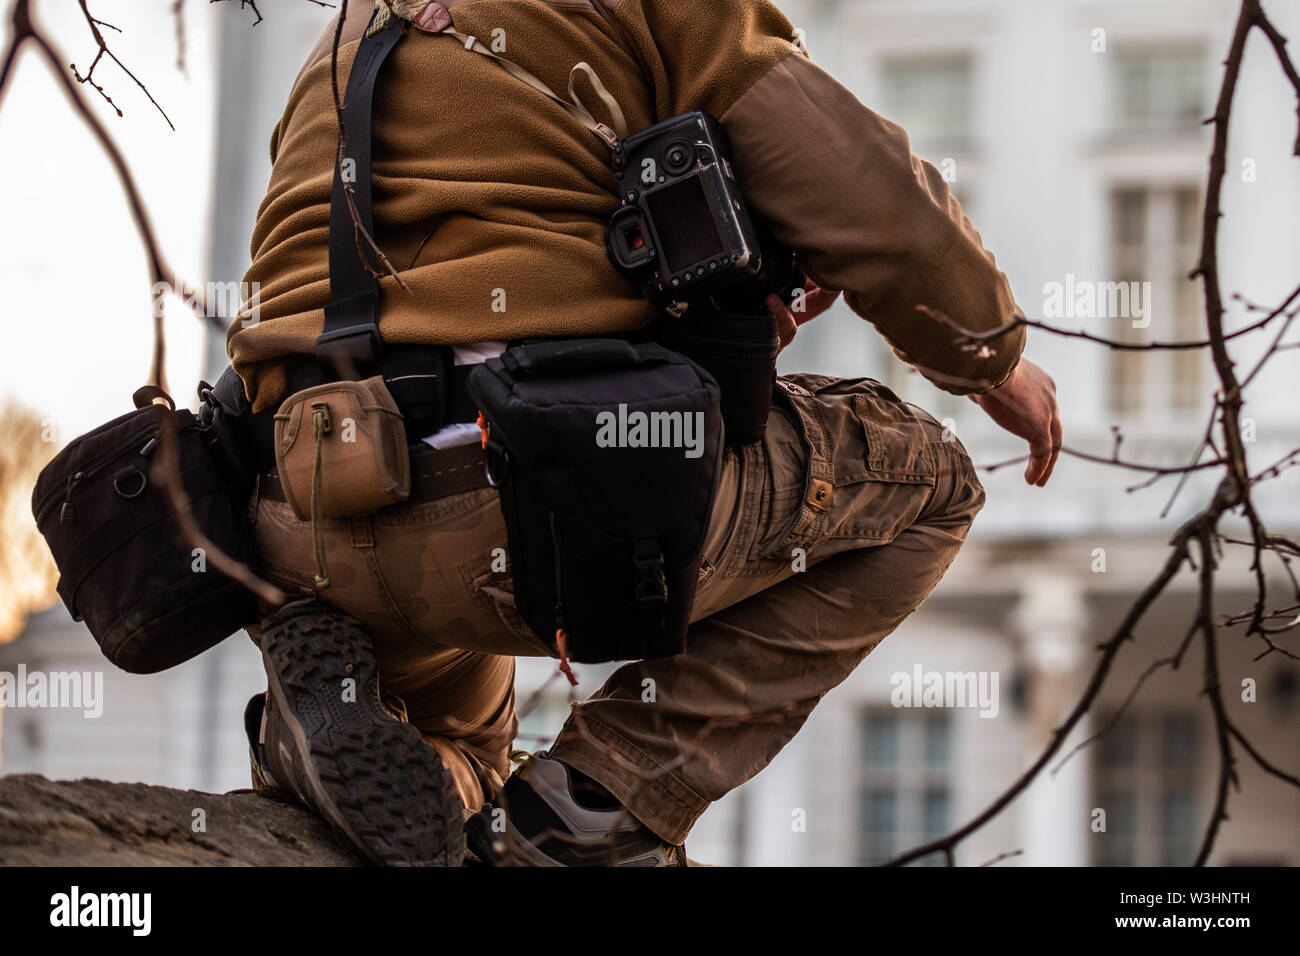 Professional extreme photographer belt pouch system gear in action. Stock Photo